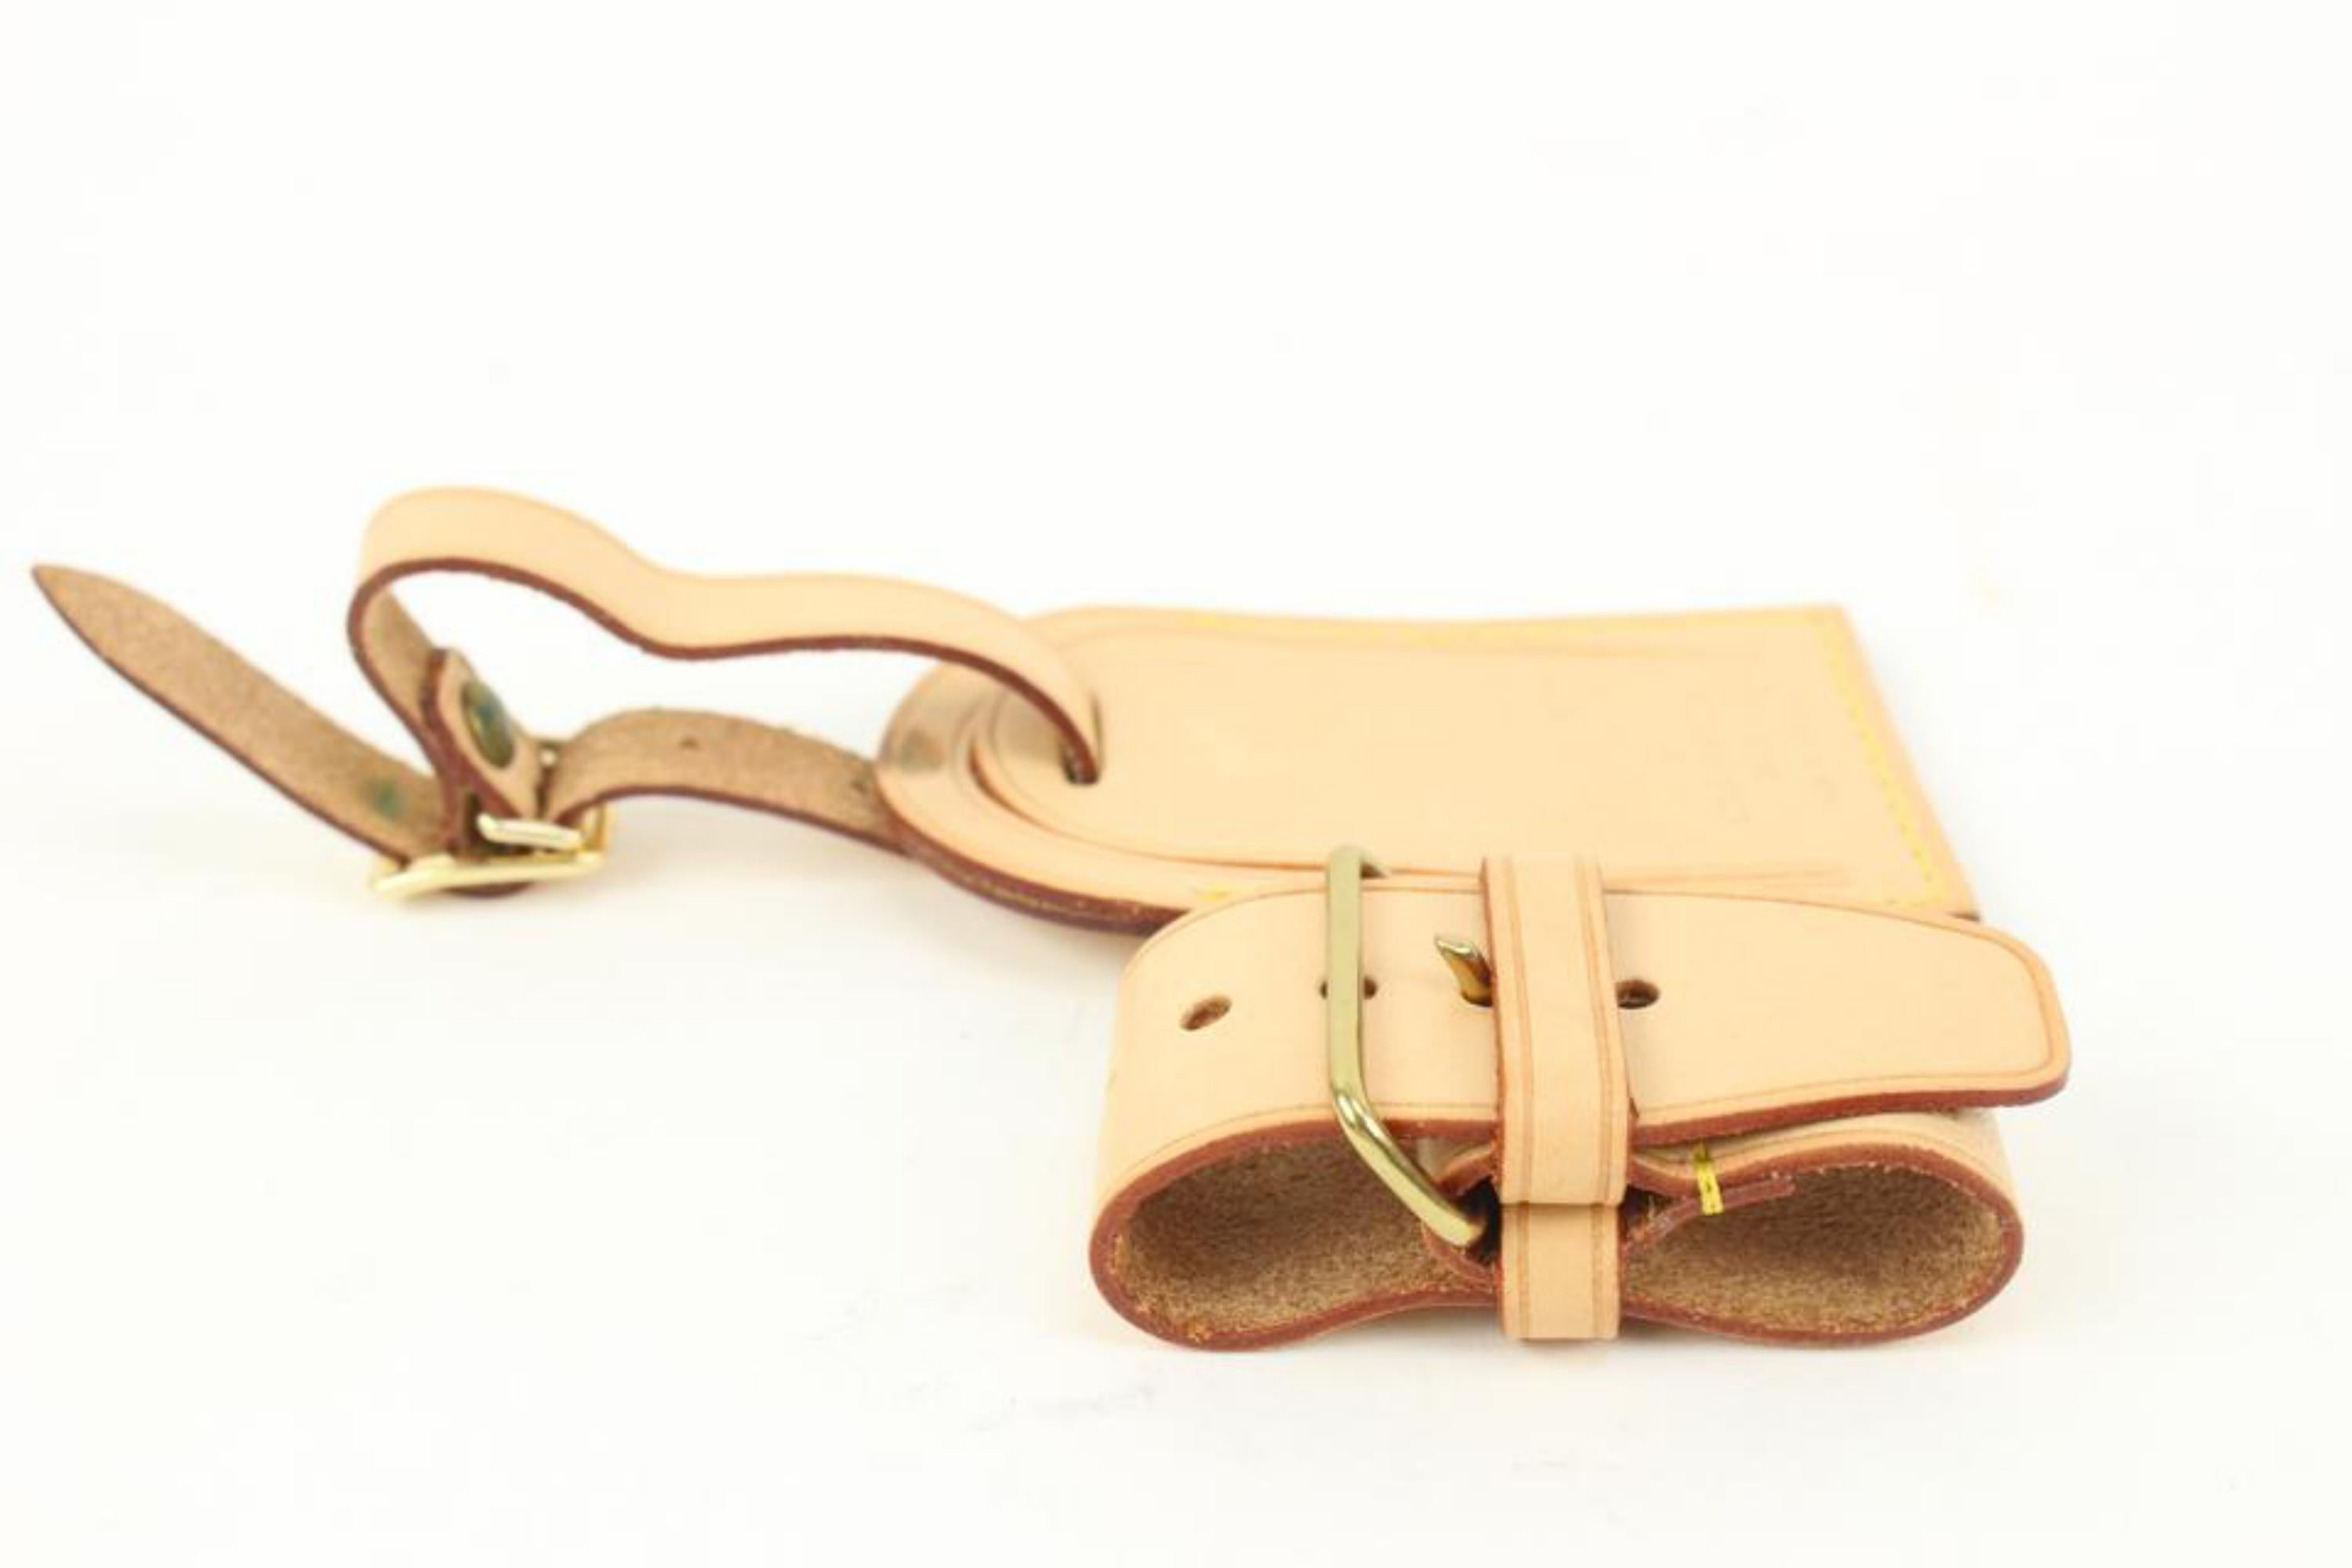 Louis Vuitton Natural Vachetta Luggage Tag and Poignet Set 2LV96a In Excellent Condition For Sale In Dix hills, NY